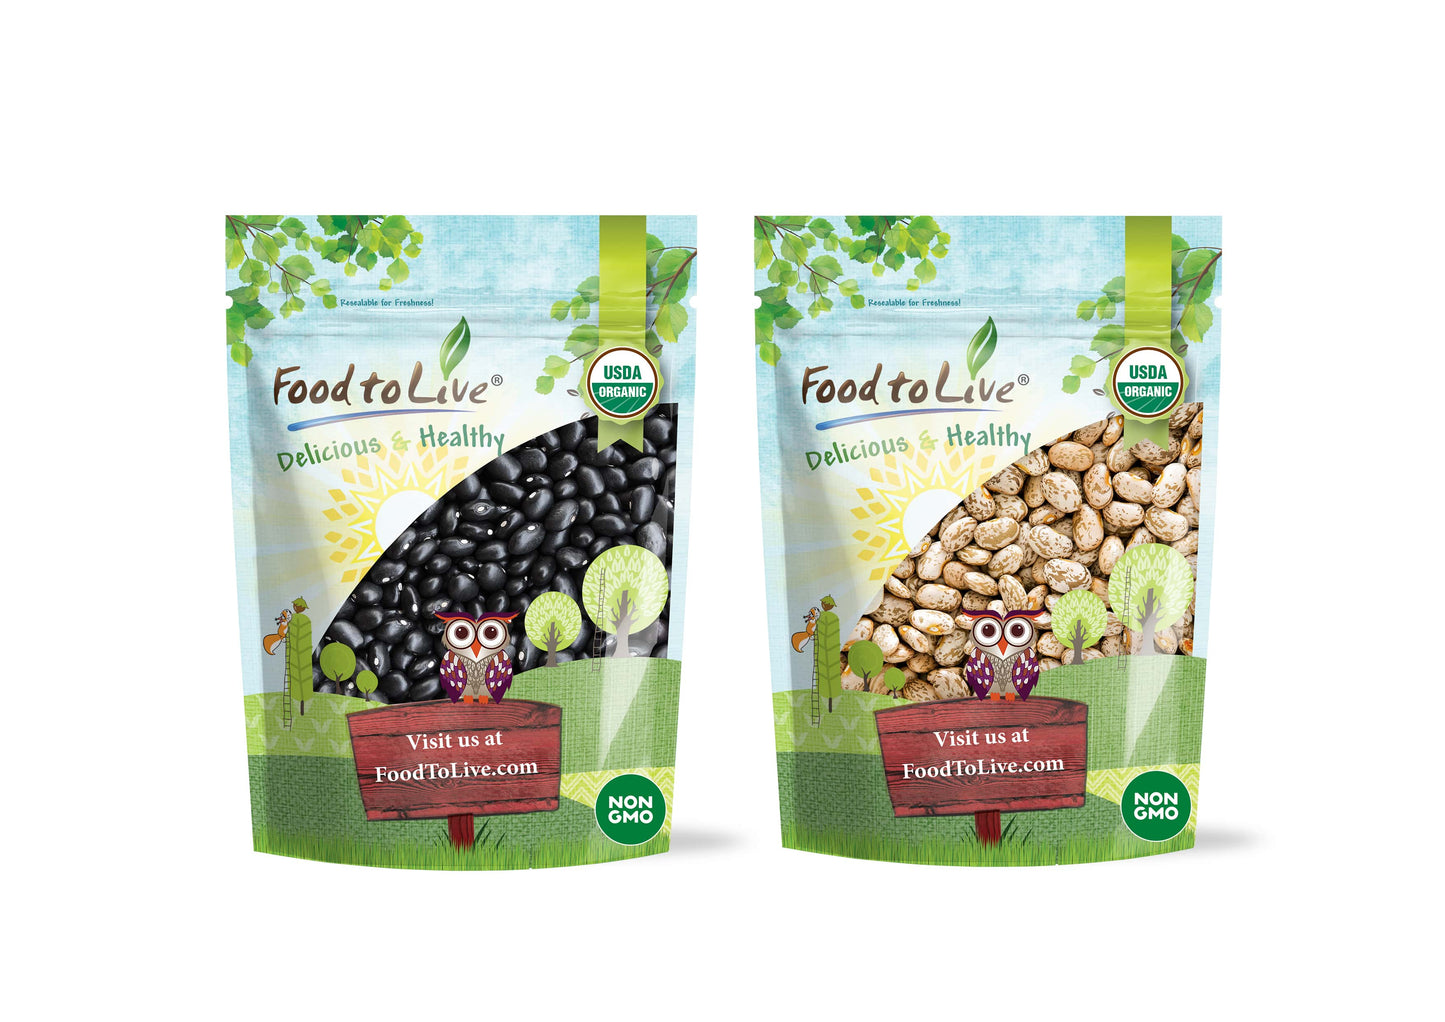 Organic Dry Beans Bundle, 2 Pack – Organic Black Beans (5 LB), Organic Pinto Beans (5 LB), Non-GMO, Raw, Vegan, Kosher, Sproutable, Bulk. Rich in Fiber and Protein. Perfect for Soups, Burritos, Tacos